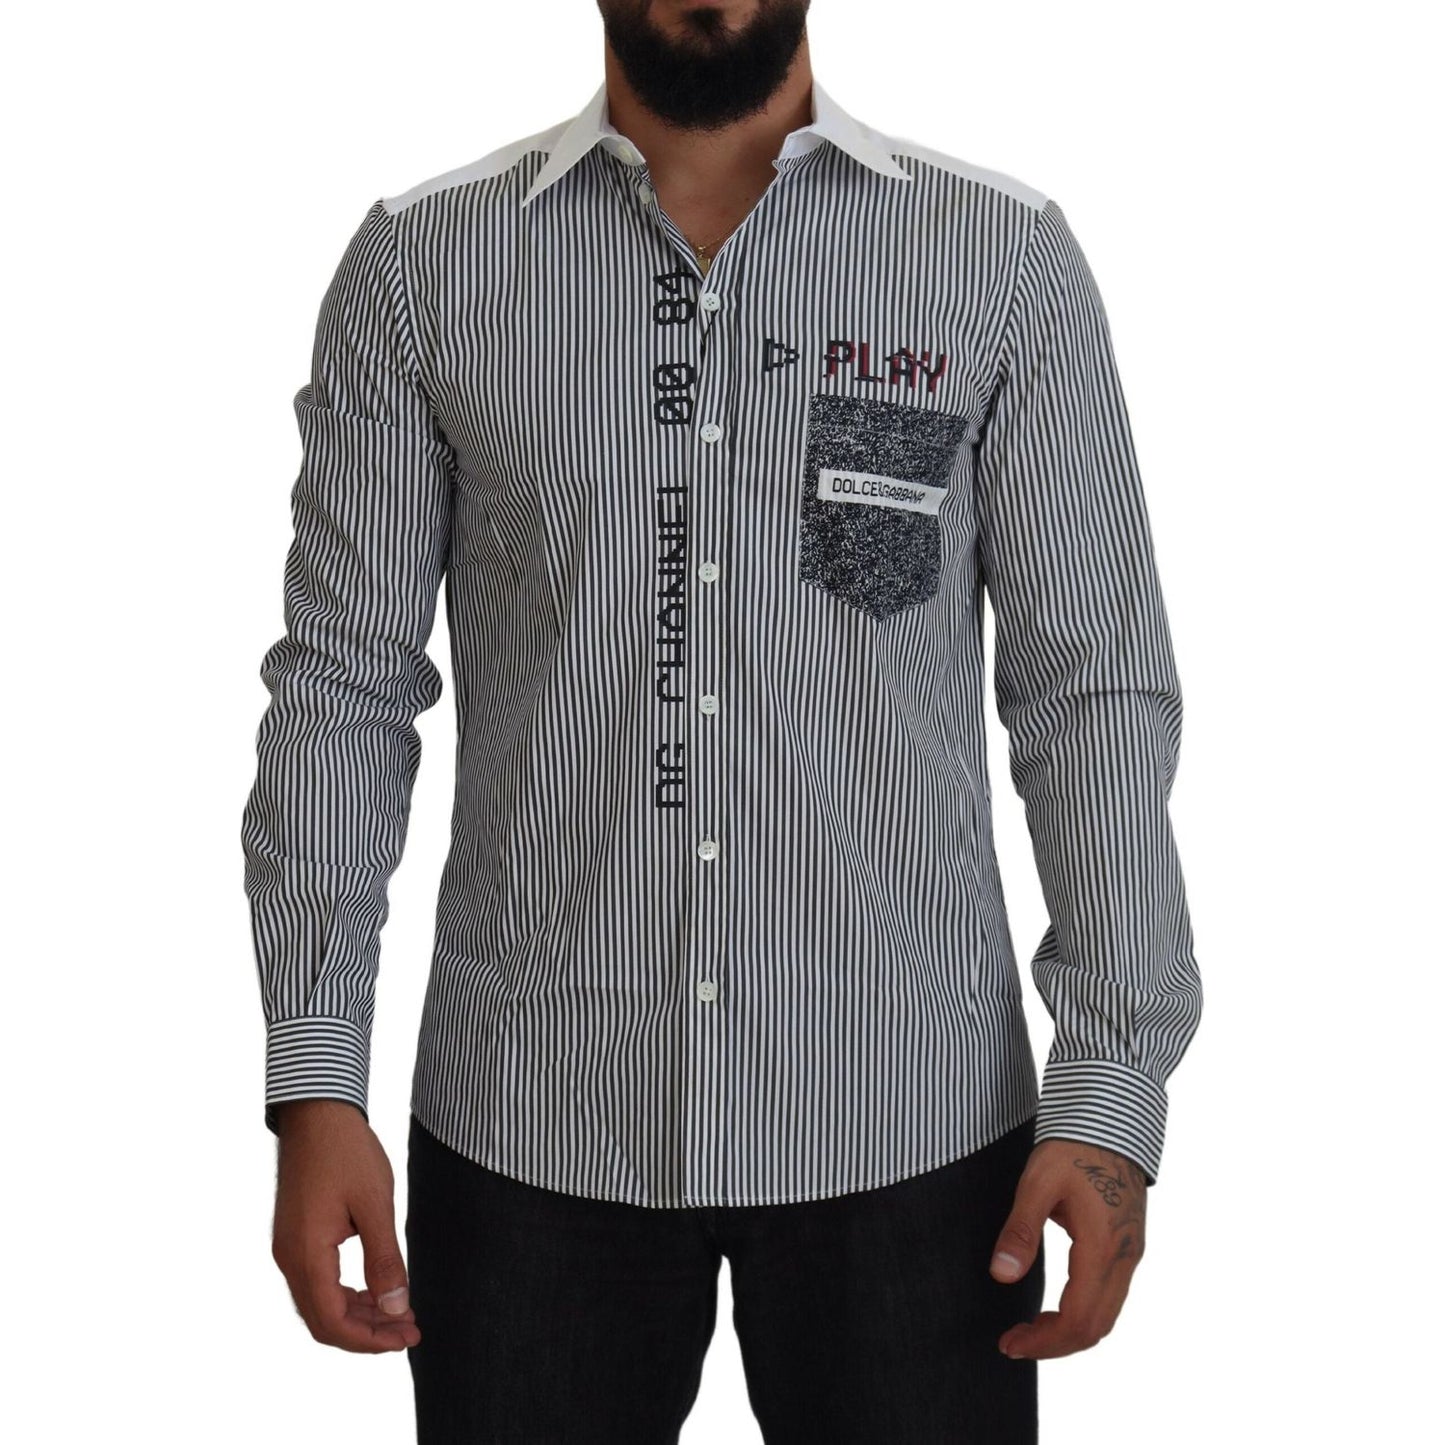 Dolce & Gabbana Slim Fit Striped Casual Shirt with Channel Motive gray-white-striped-slim-fit-shirt